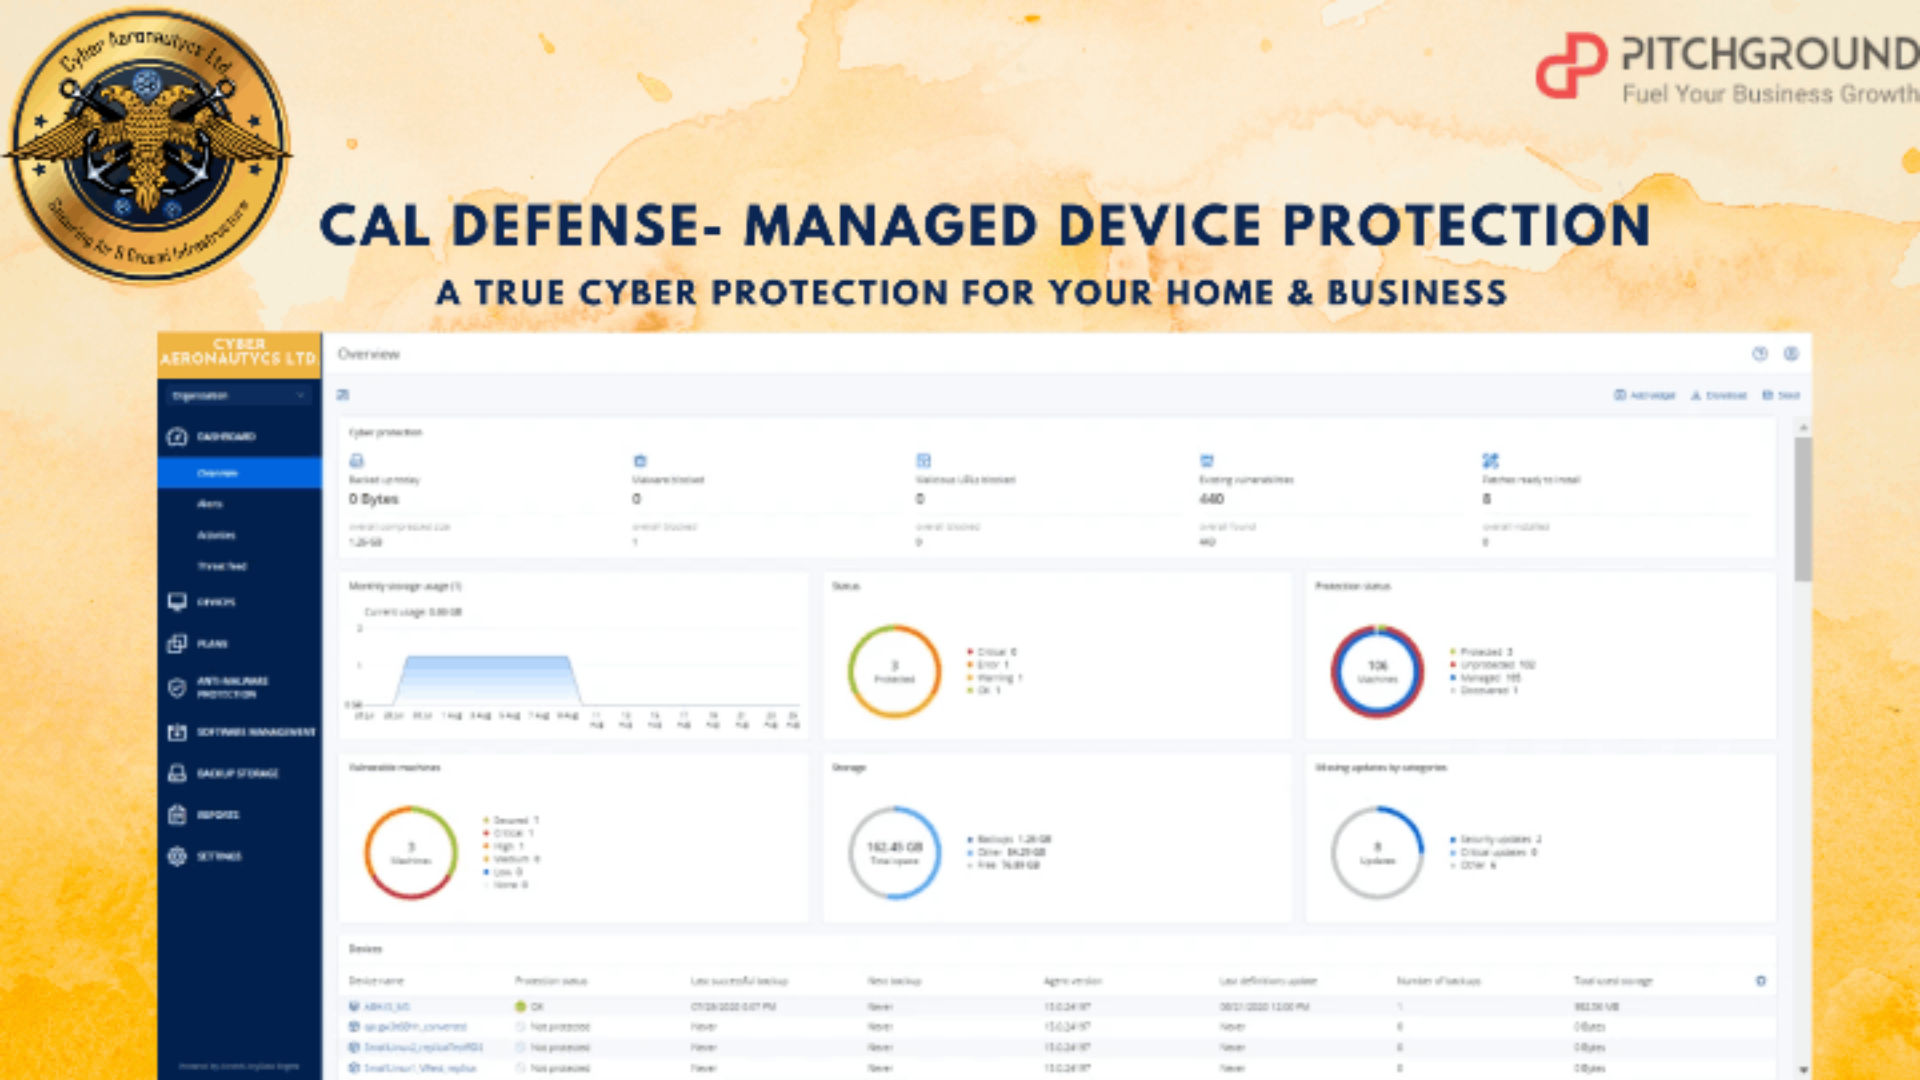 Lifetime Deal to CAL Defense- Managed Device Protection & Management: Plan B for $399